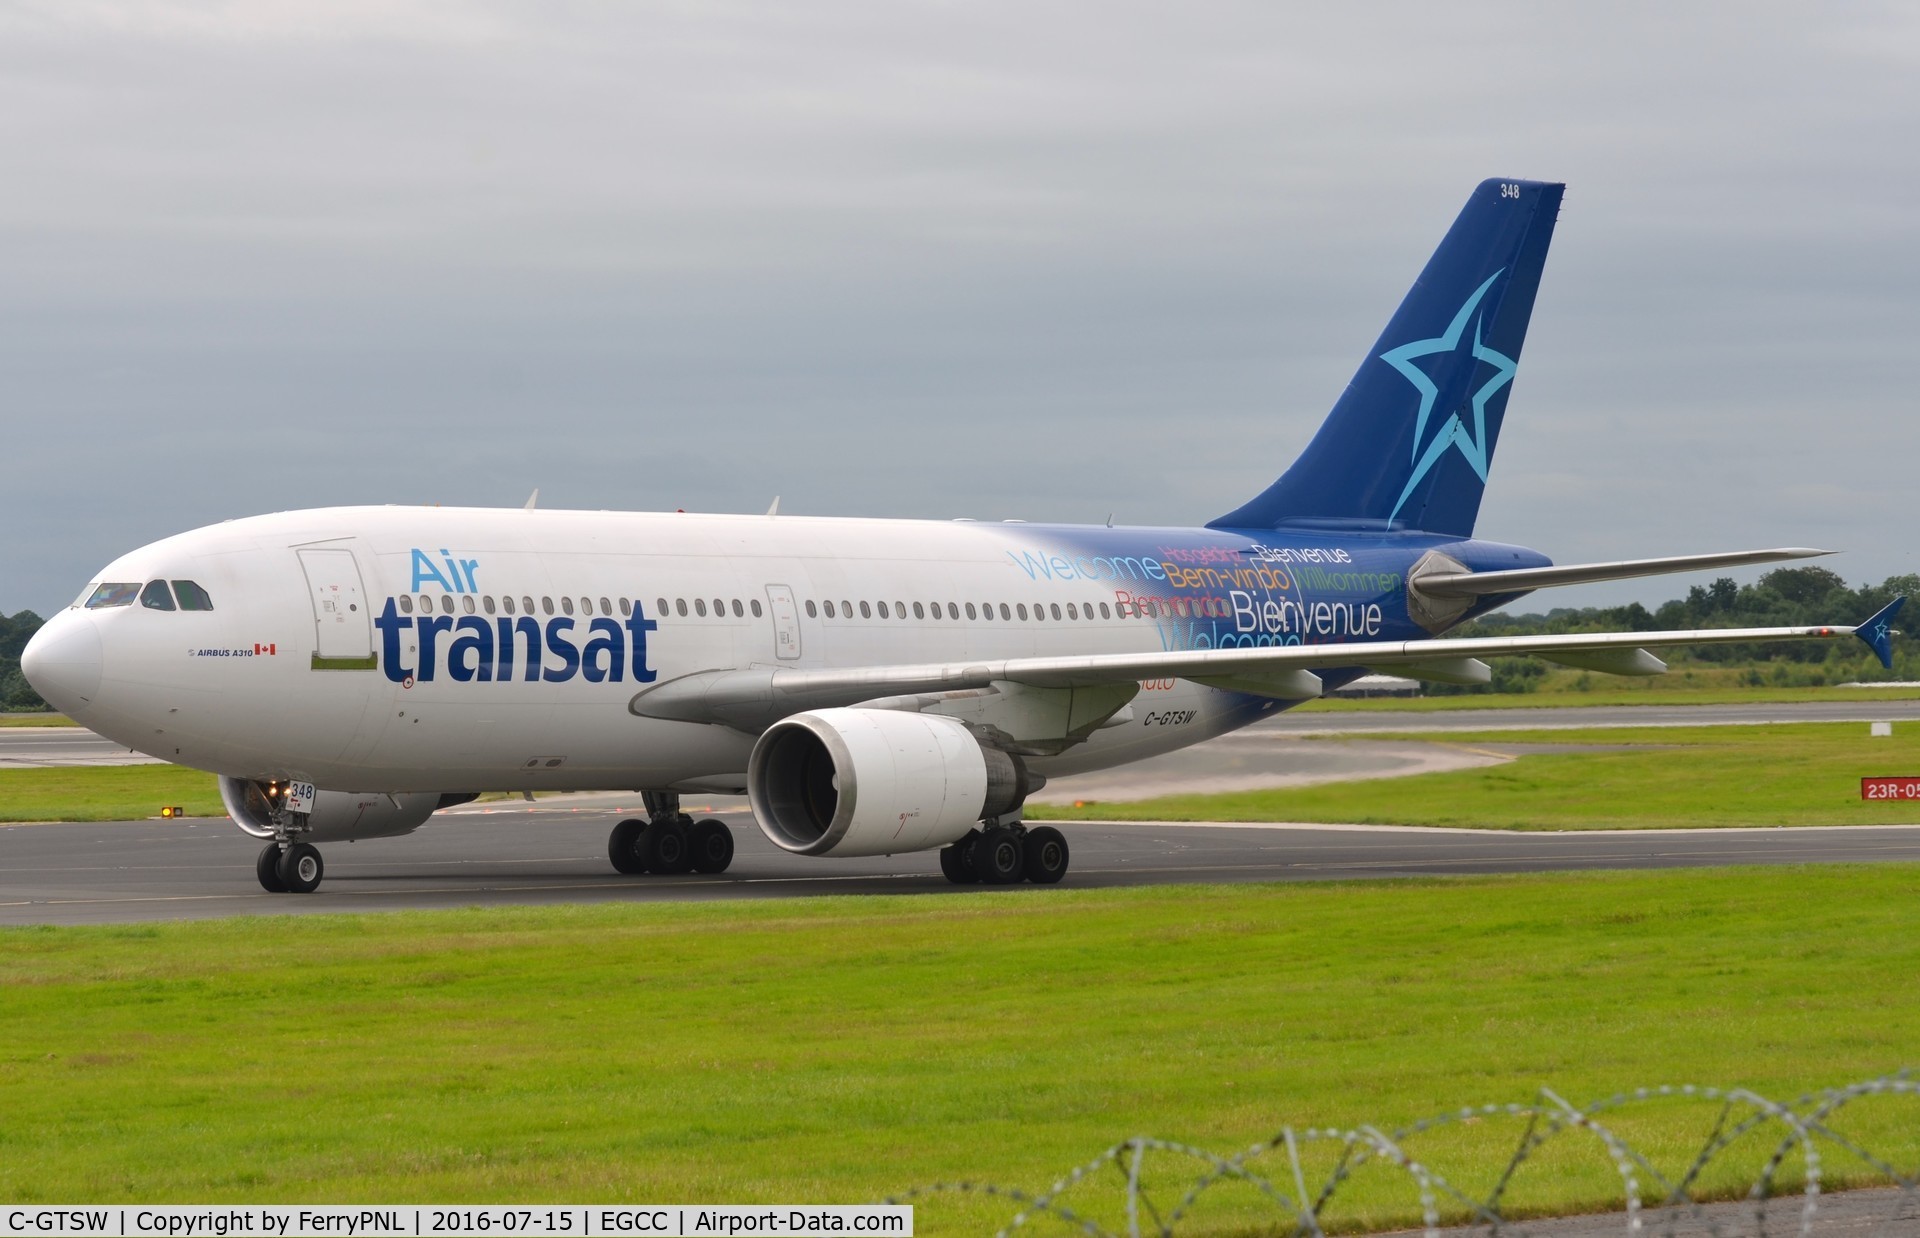 C-GTSW, 1988 Airbus A310-304 C/N 483, AirTransat A310 taxiing to its gate at MAN